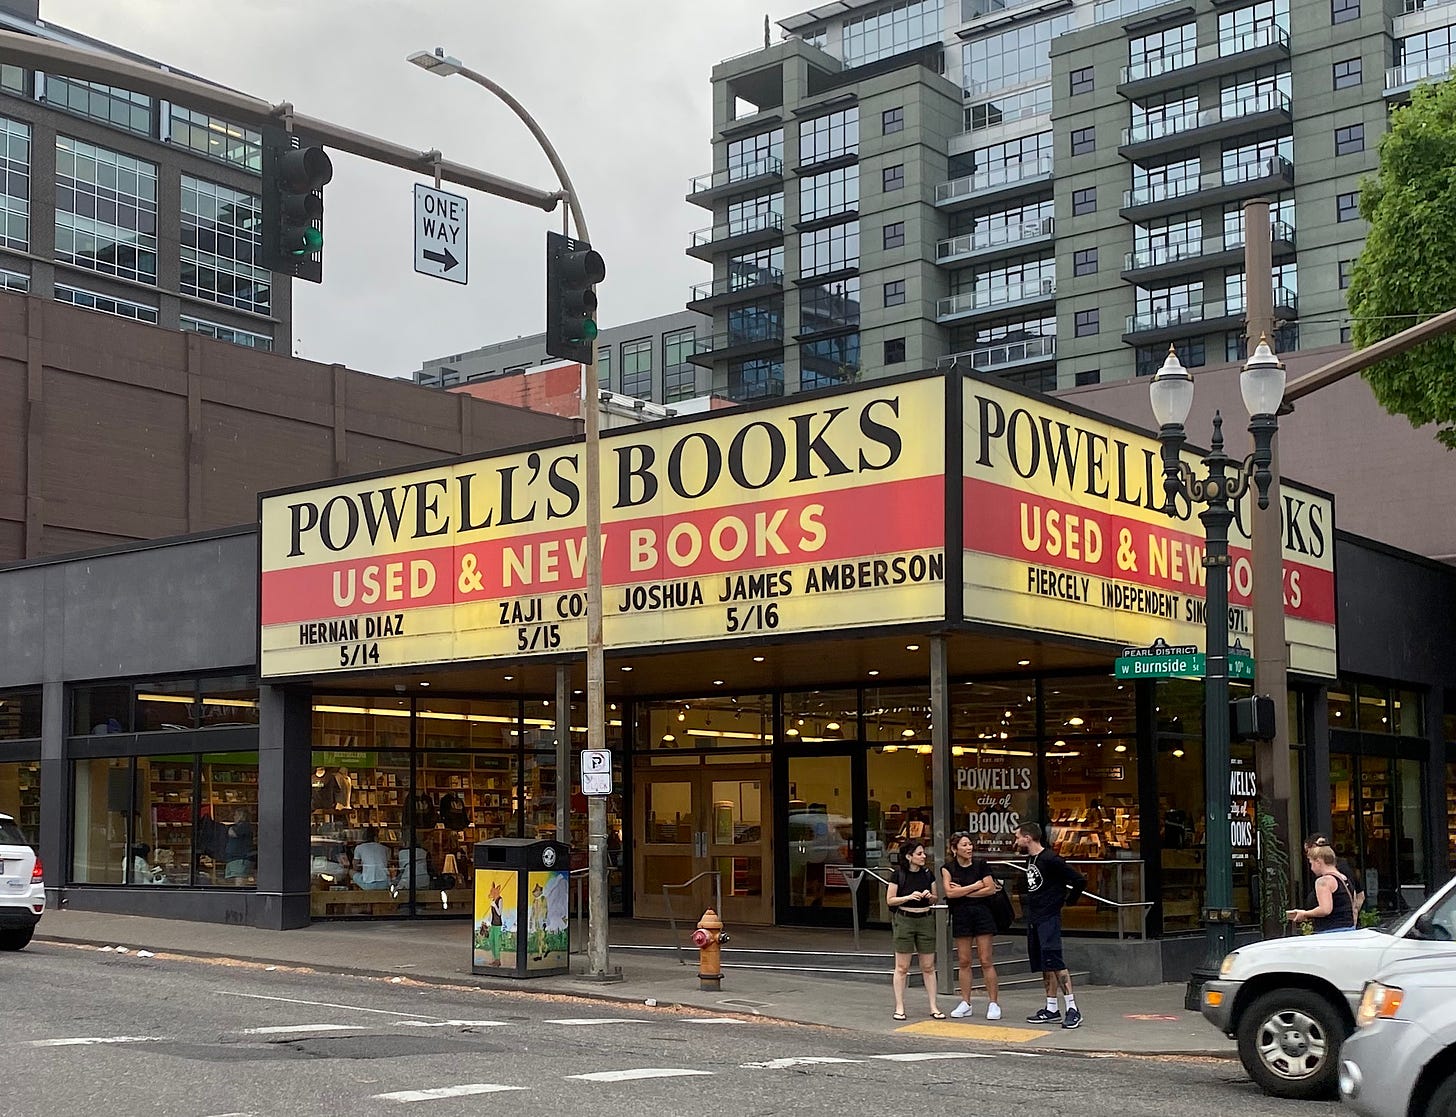 The Powell's Books reader board in Portland, Oregon, with my name on it (alongside the great Zaji Cox and Herman Diaz)